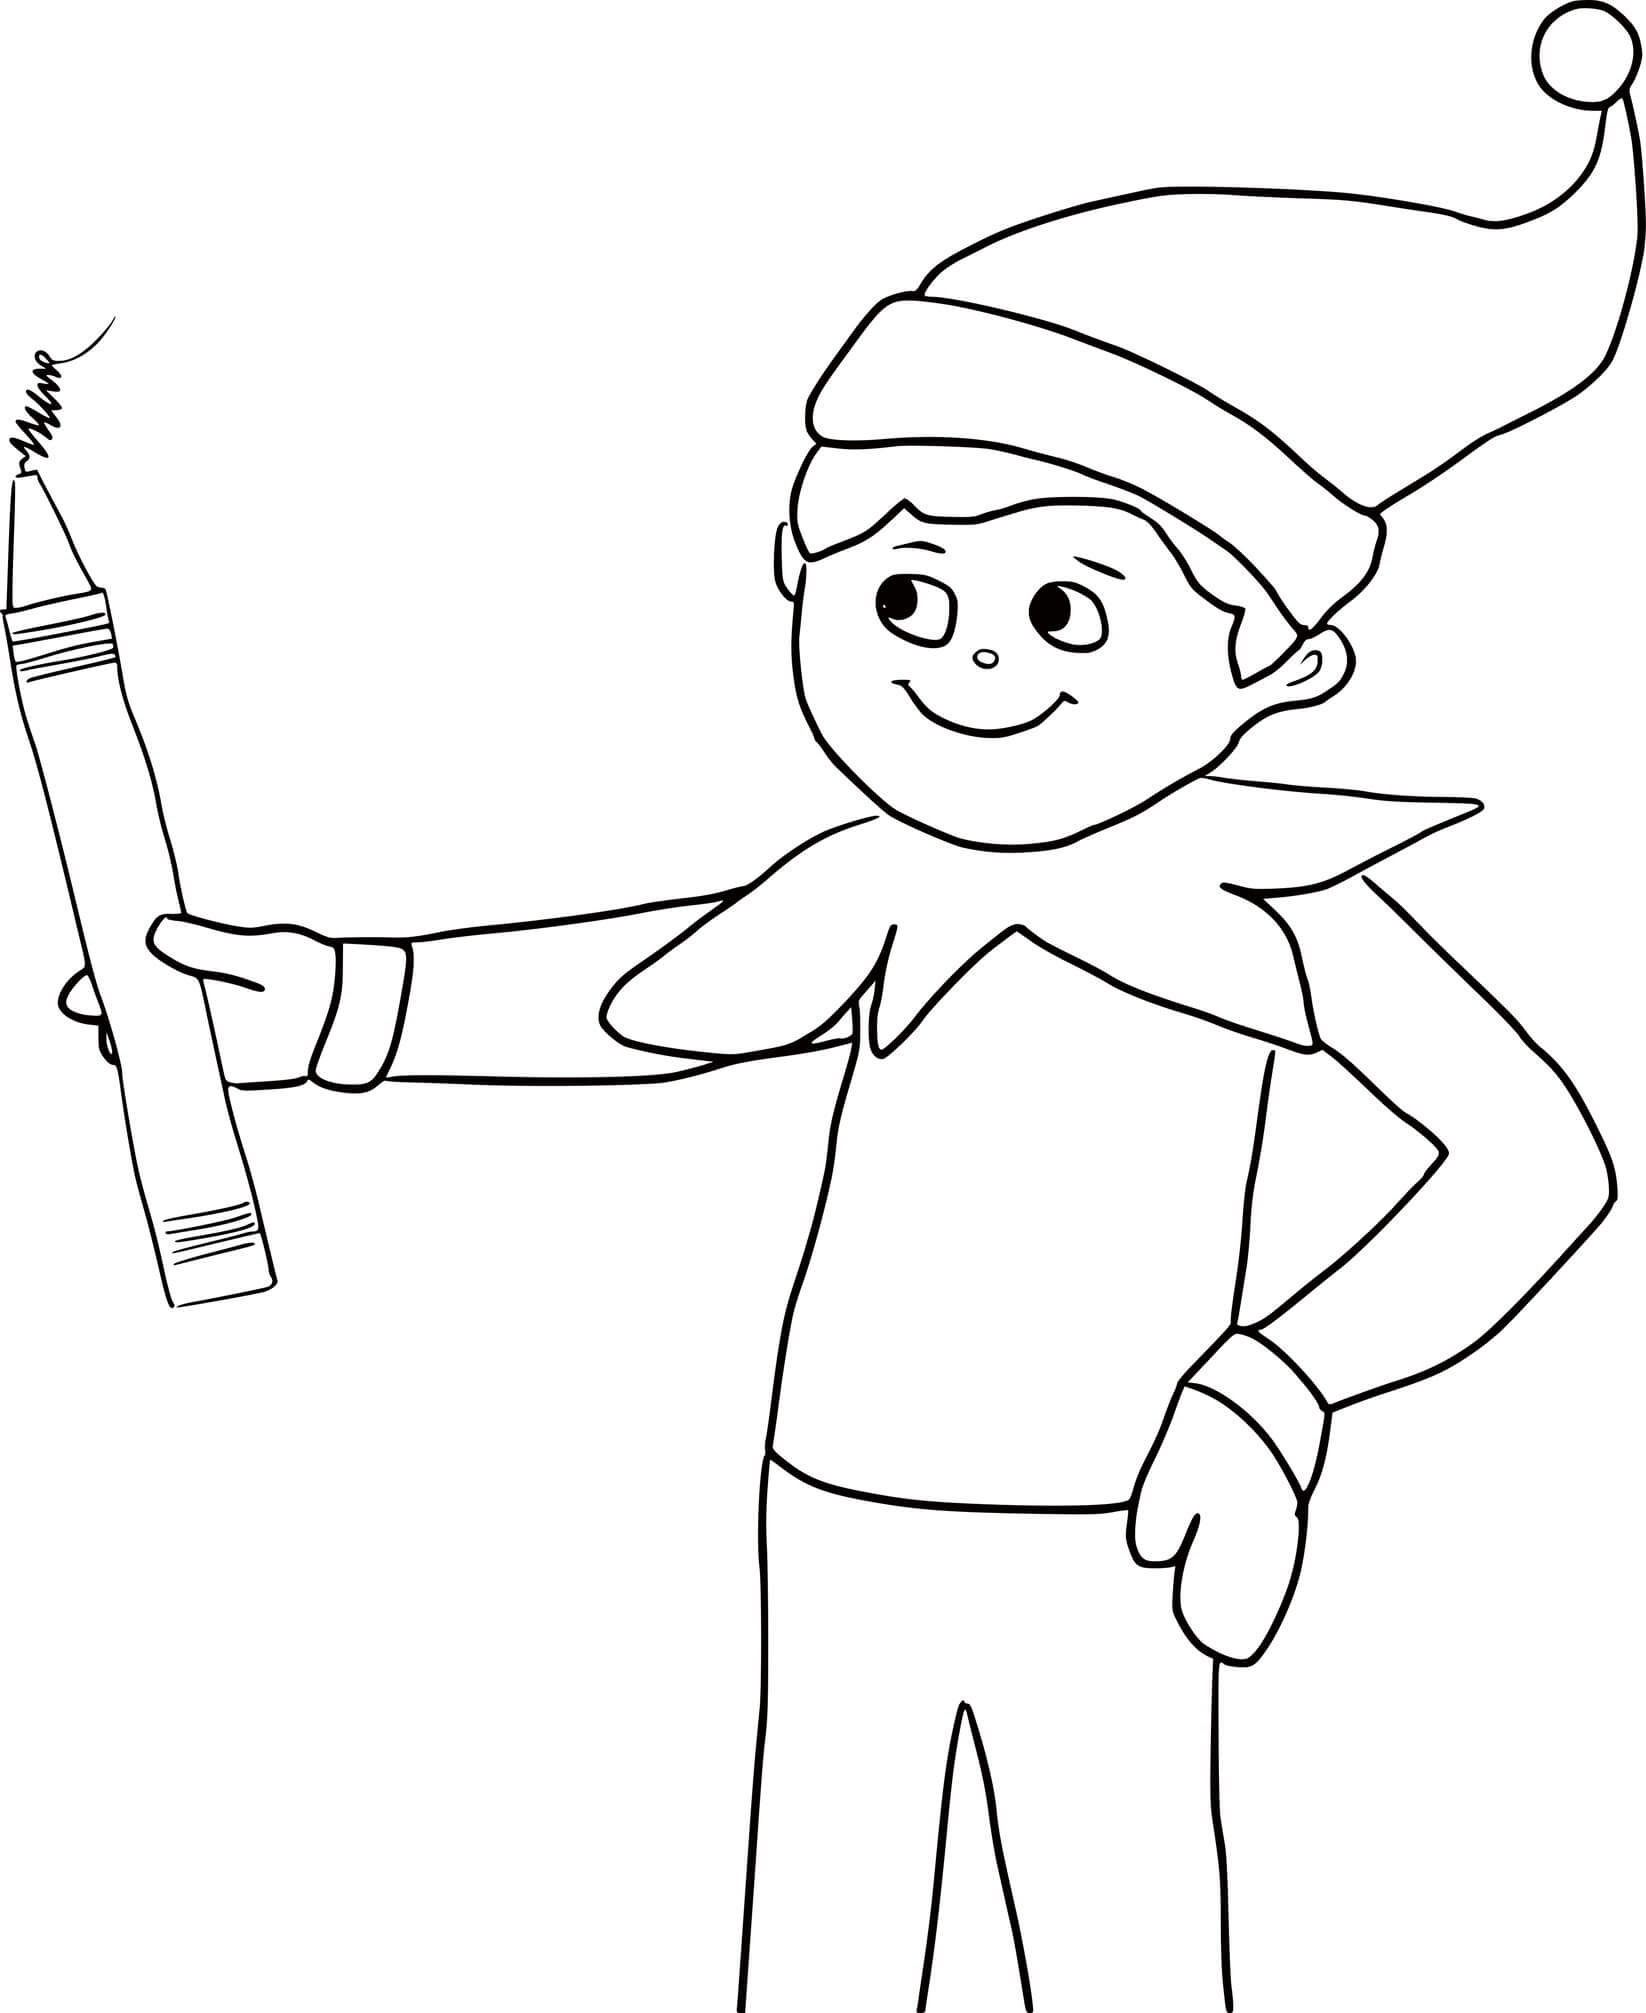 Elf On The Shelf Holds A Pencil